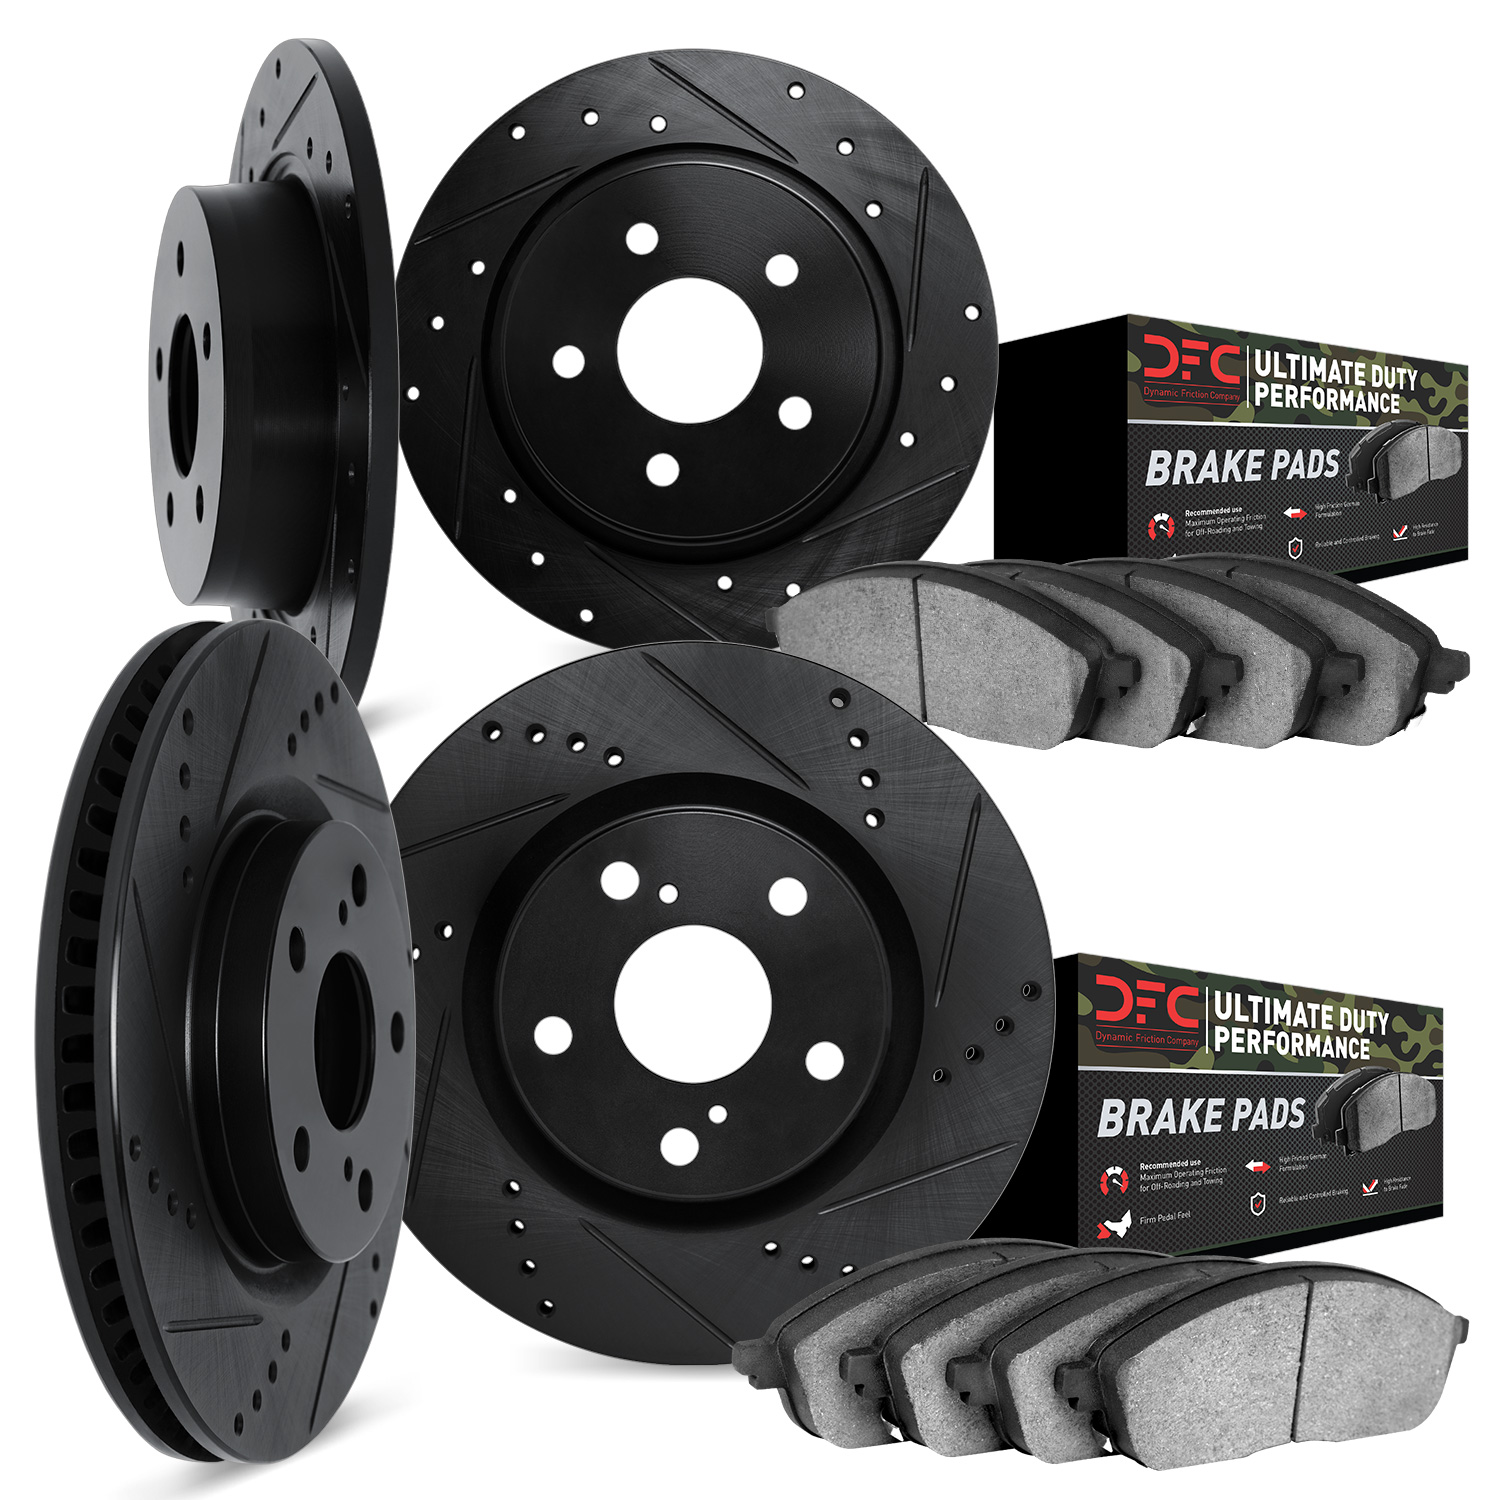 8404-54009 Drilled/Slotted Brake Rotors with Ultimate-Duty Brake Pads Kit [Black], 1997-2000 Ford/Lincoln/Mercury/Mazda, Positio